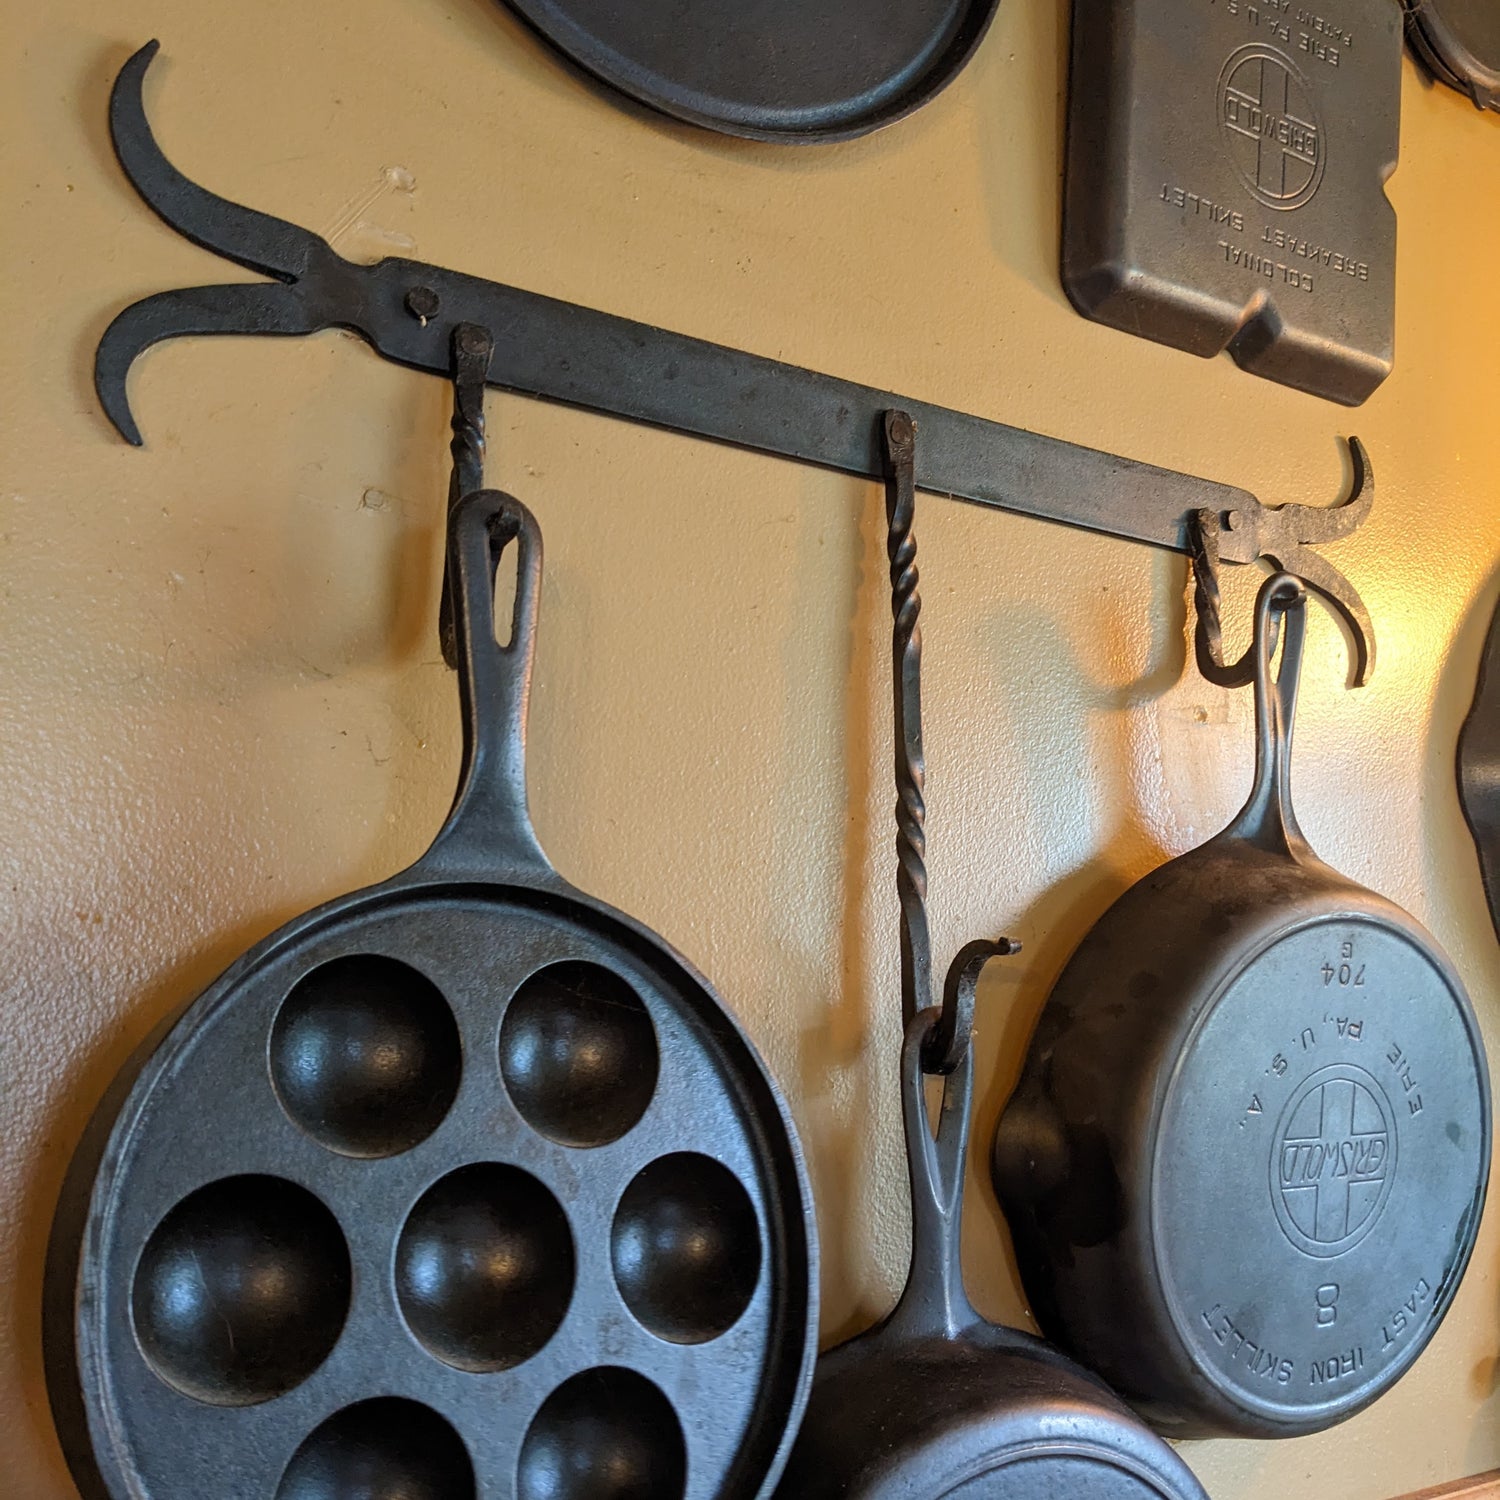 Custom three hook pot rack made by our blacksmith.  Shown mounted on a tan wall holding vintage Griswold skillets.